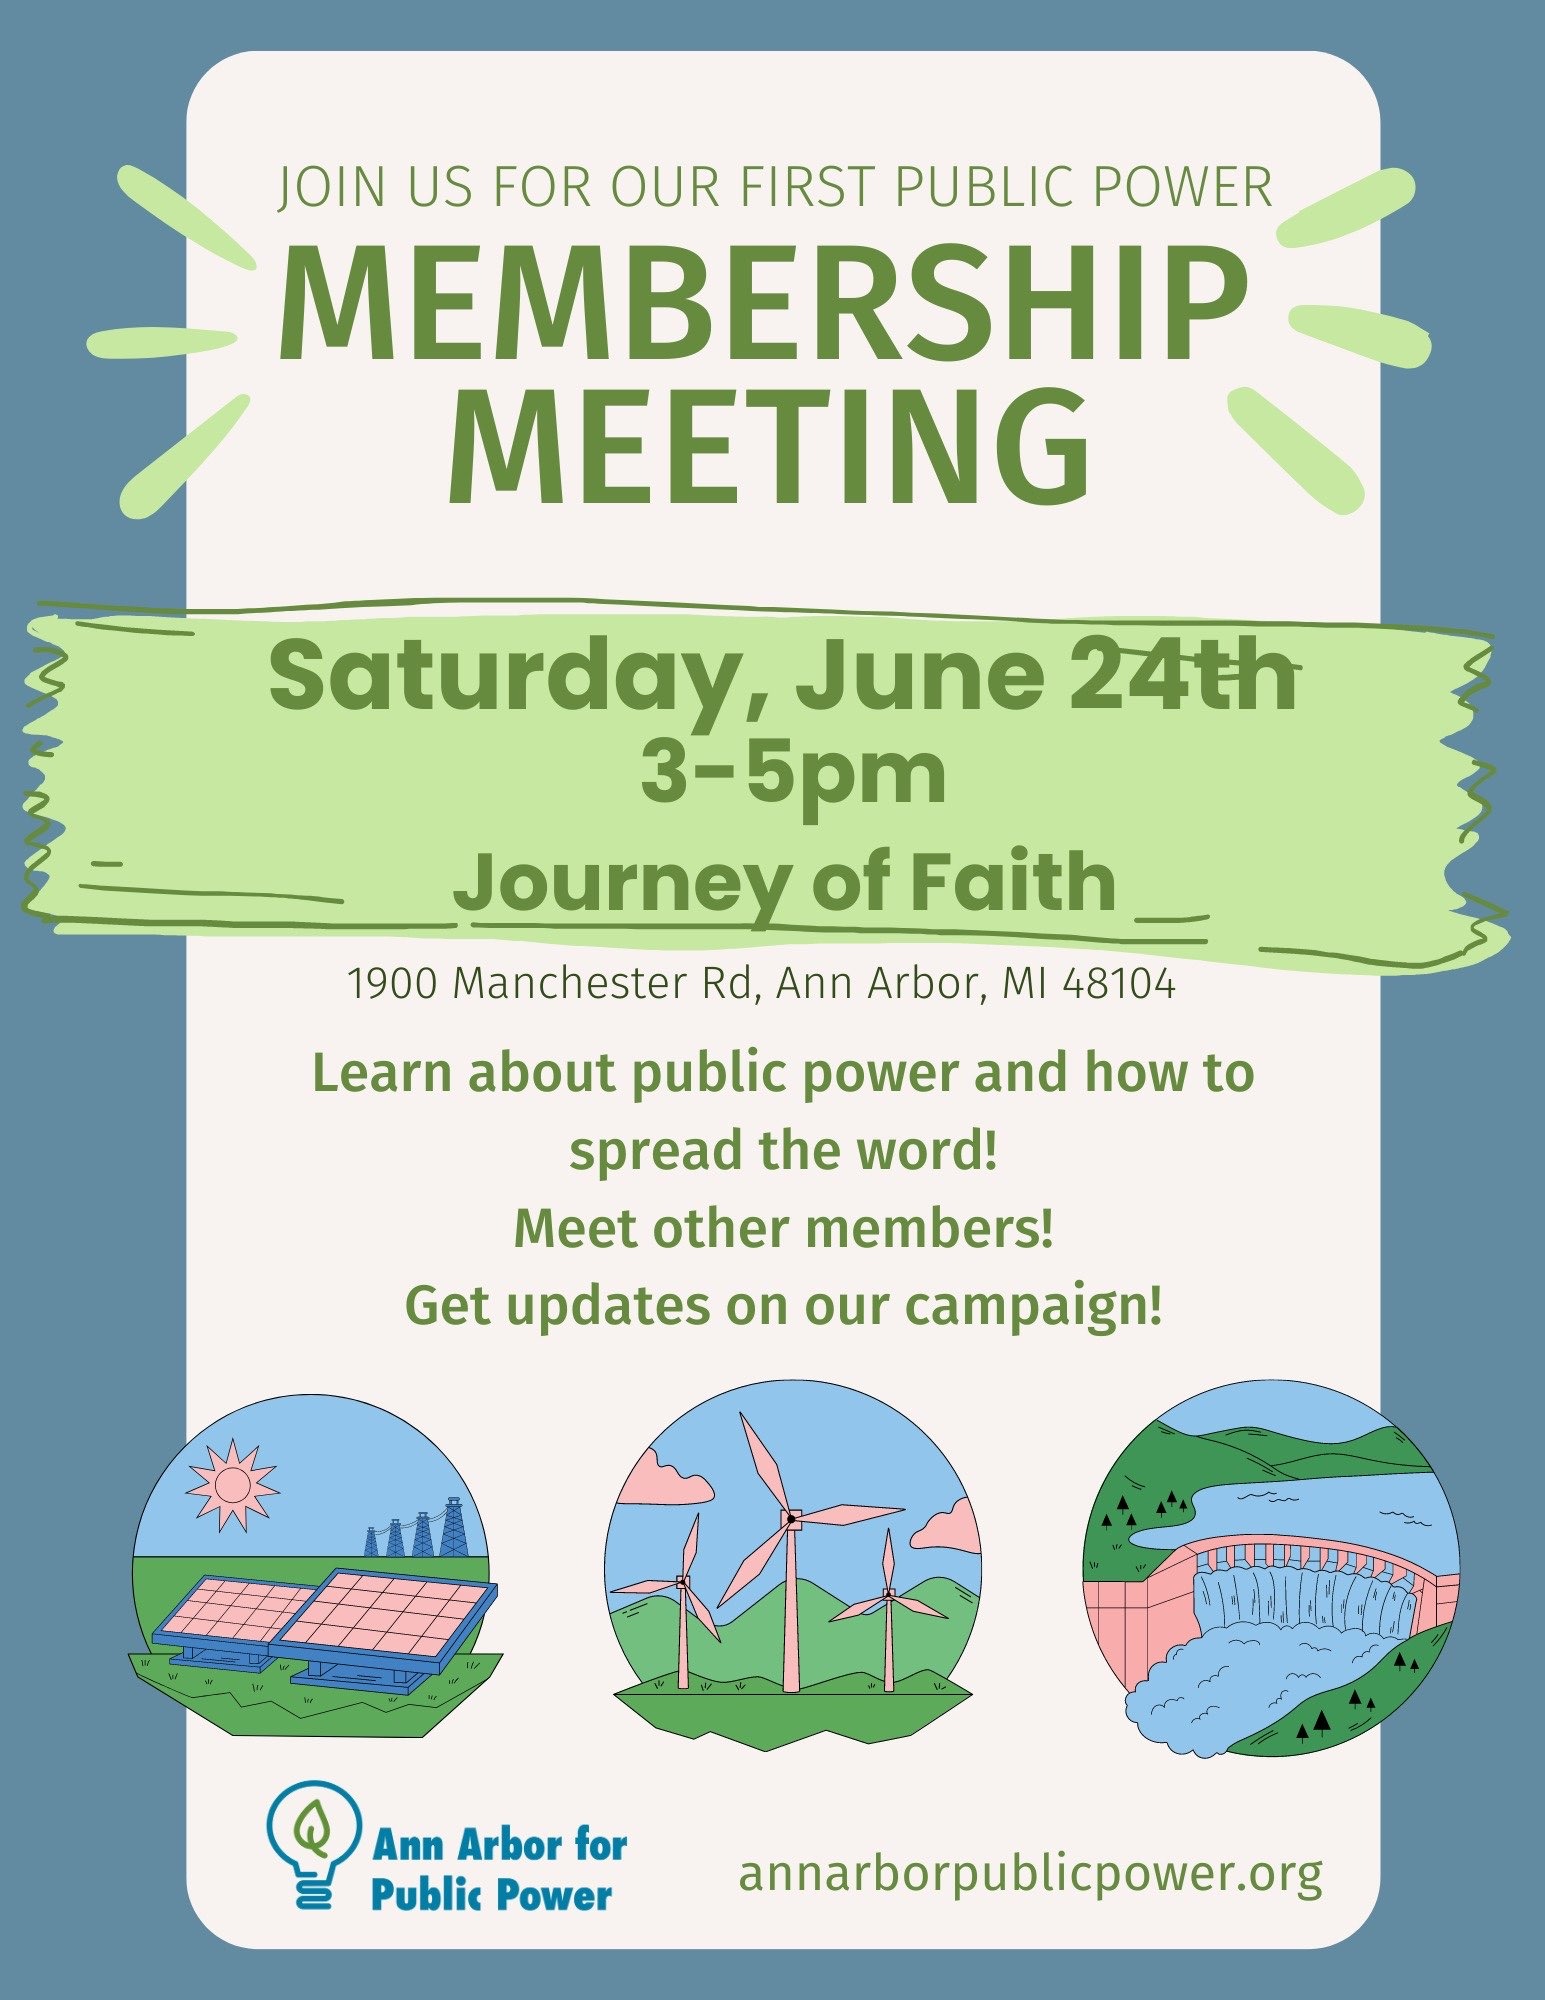 Join us for our first public power membership meeting Saturday, June 24 3-5pm Journey of Faith 1900 Manchester Rd, Ann Arbor, MI 48104 Learn about public power and how to spread the word! Meet other members! Get updates on our campaign! Ann Arbor for Public Power annarborforpublicpower.org